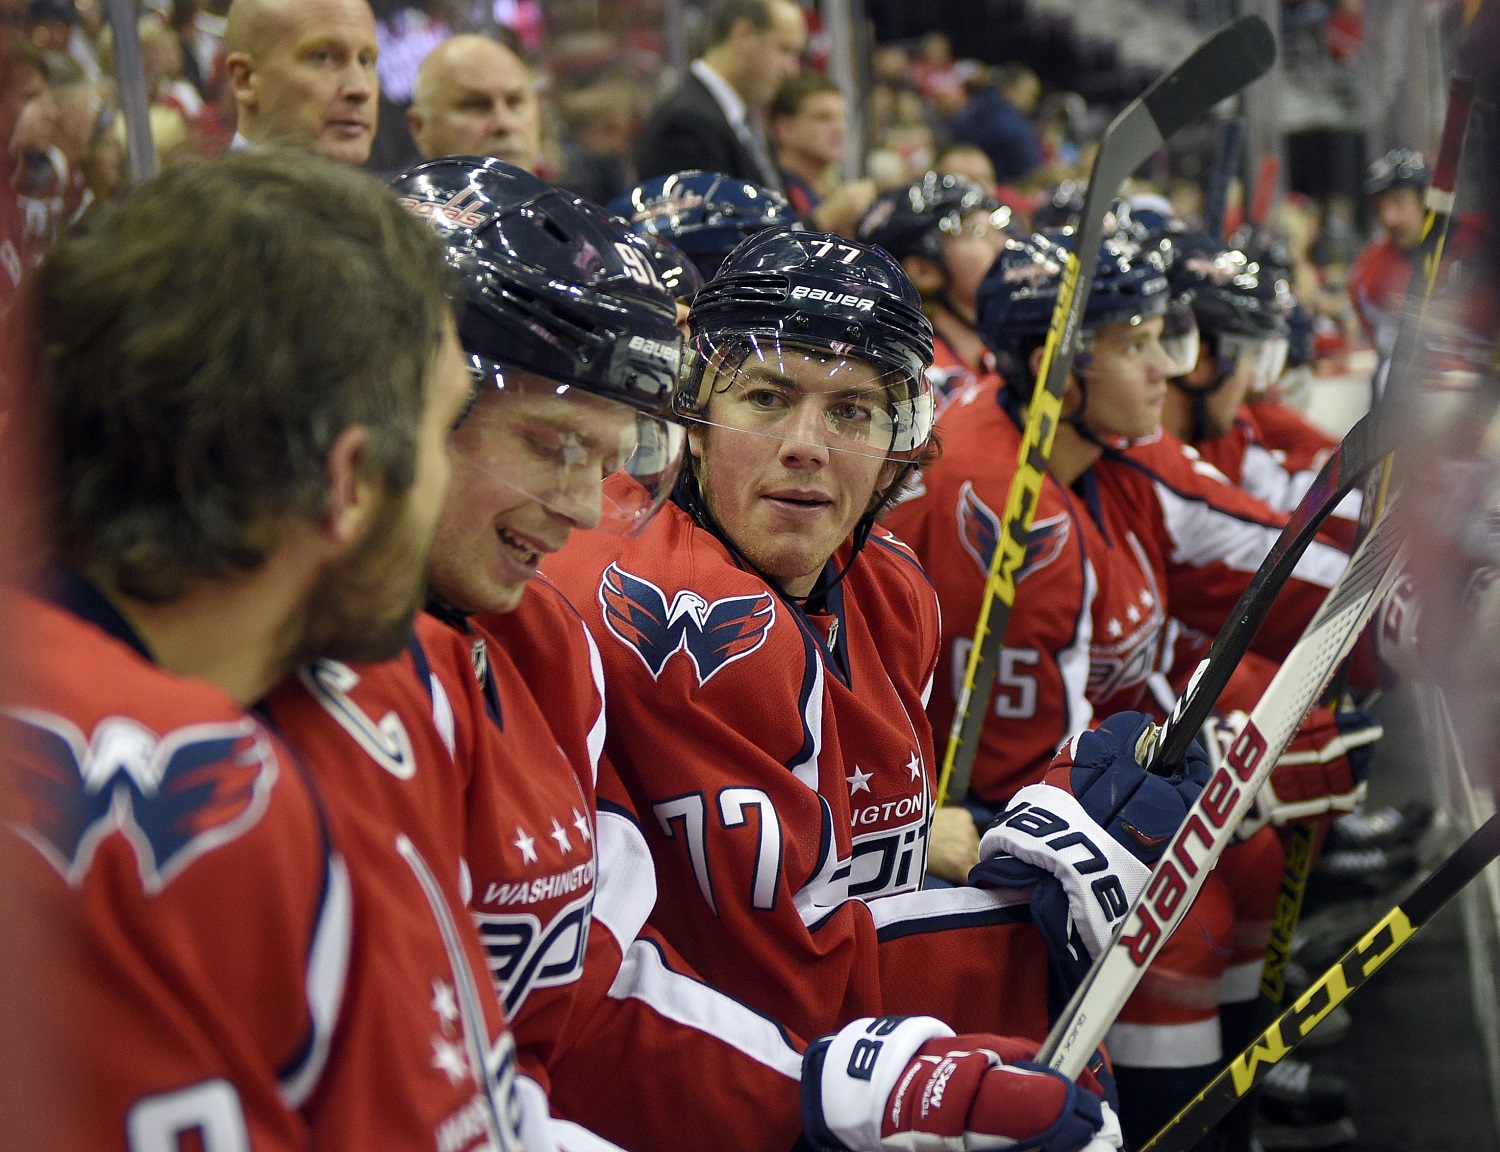 New Capitals acquisitions making smooth transitions